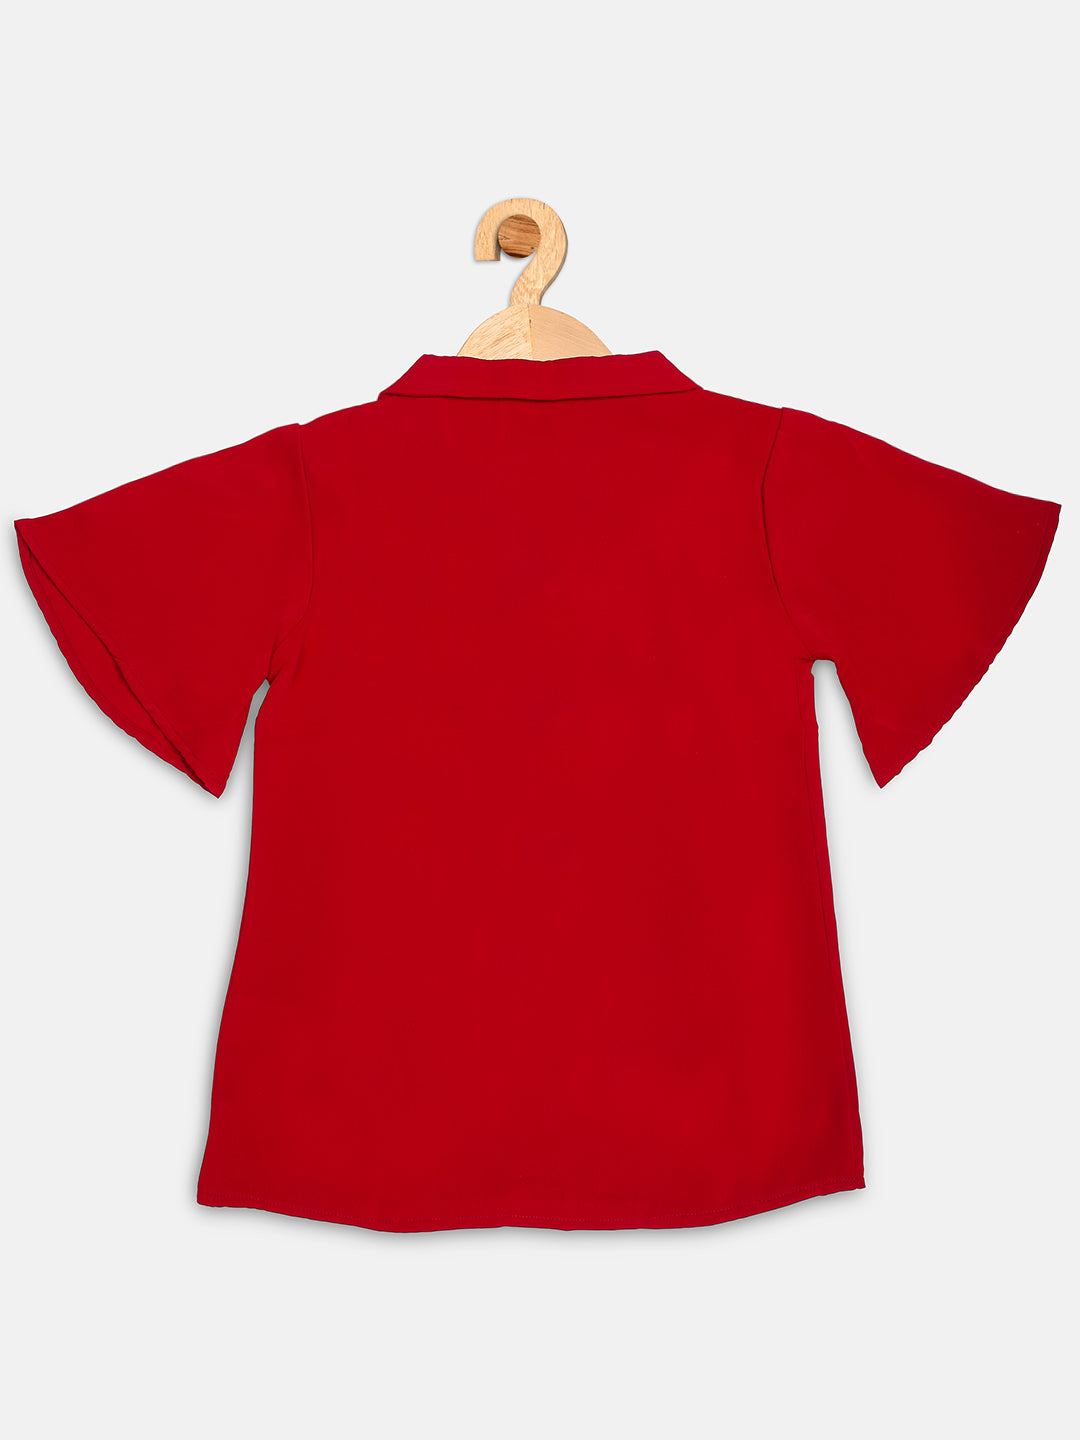 Pampolina  Girls Solid Half Sleeve Textile  Top-Red